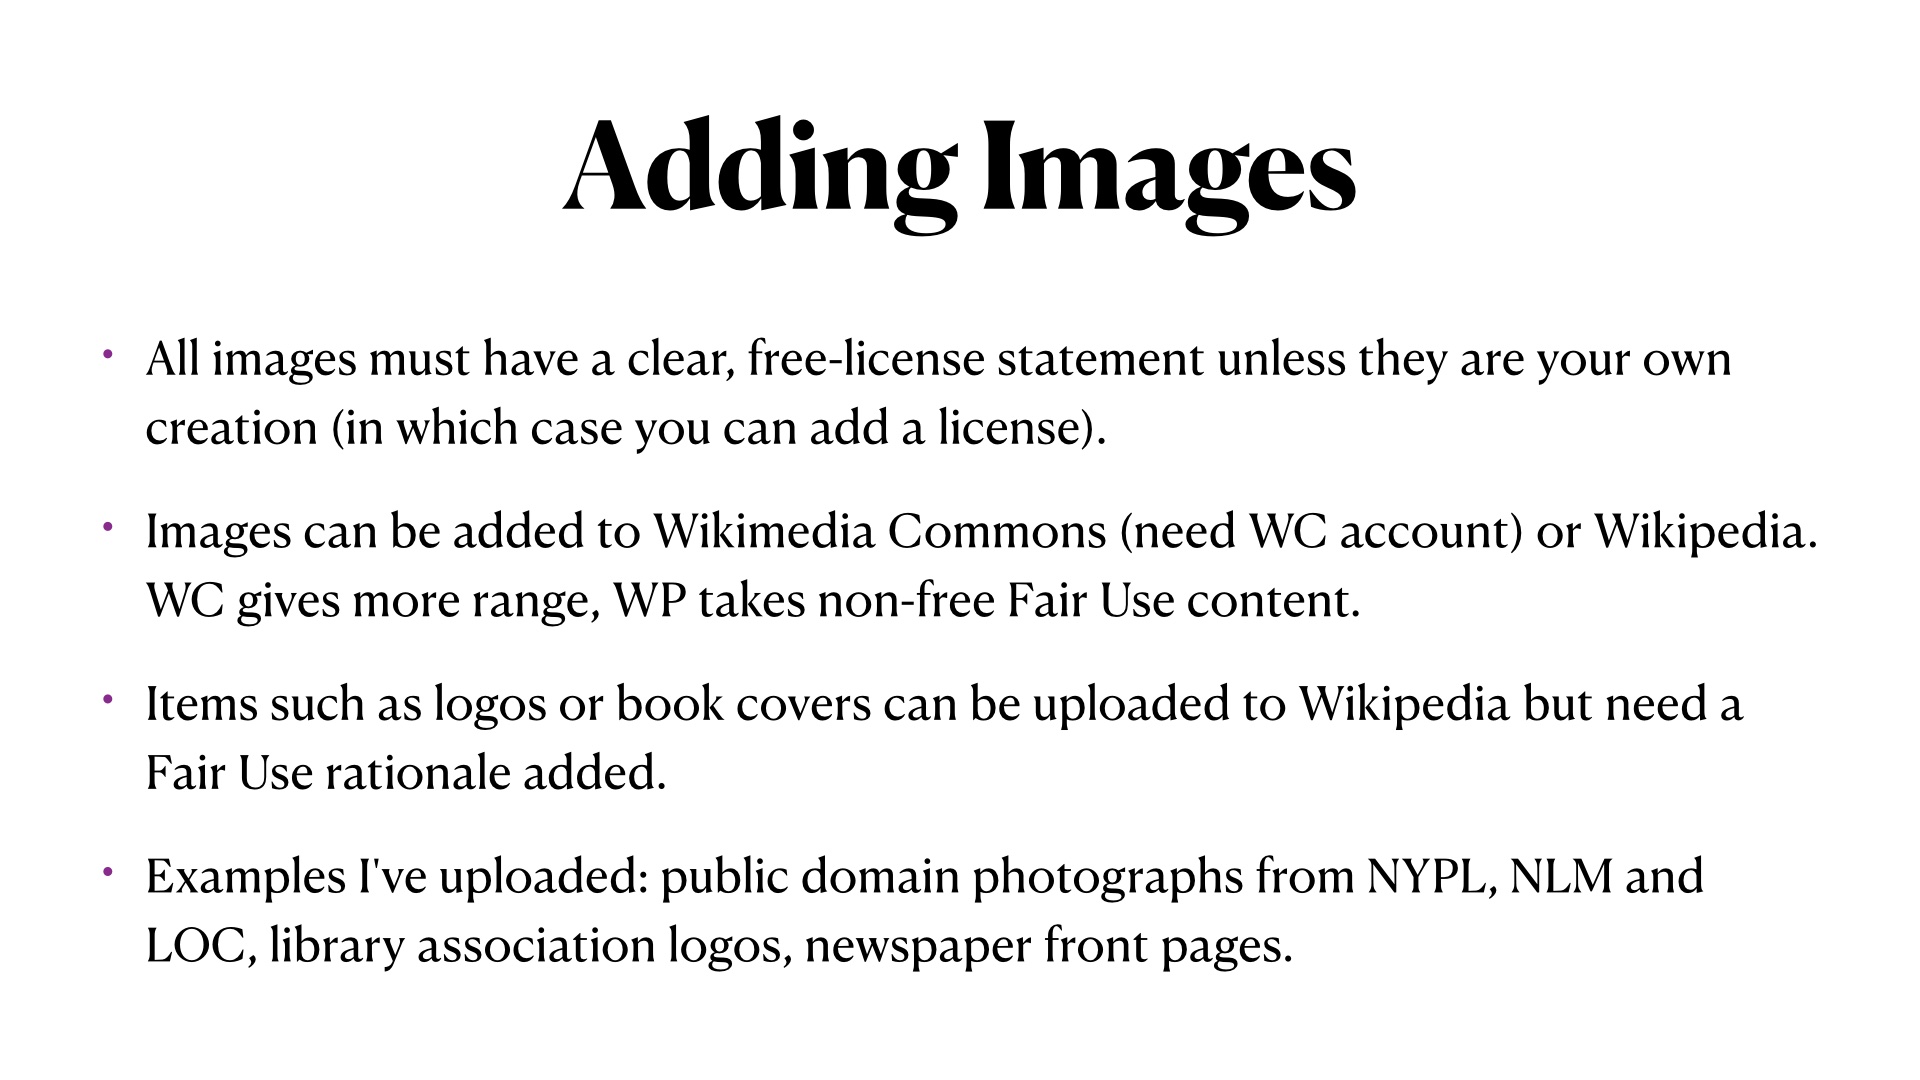 Adding Images. All images must have a clear, free-license statement unless they are your own creation (in which case you can add a license).
Images can be added to Wikimedia Commons (need WC account) or Wikipedia. WC gives more range, WP takes non-free Fair Use content.
Items such as logos or book covers can be uploaded to Wikipedia but need a Fair Use rationale added.
Examples I've uploaded: public domain photographs from NYPL, NLM and LOC, library association logos, newspaper front pages.